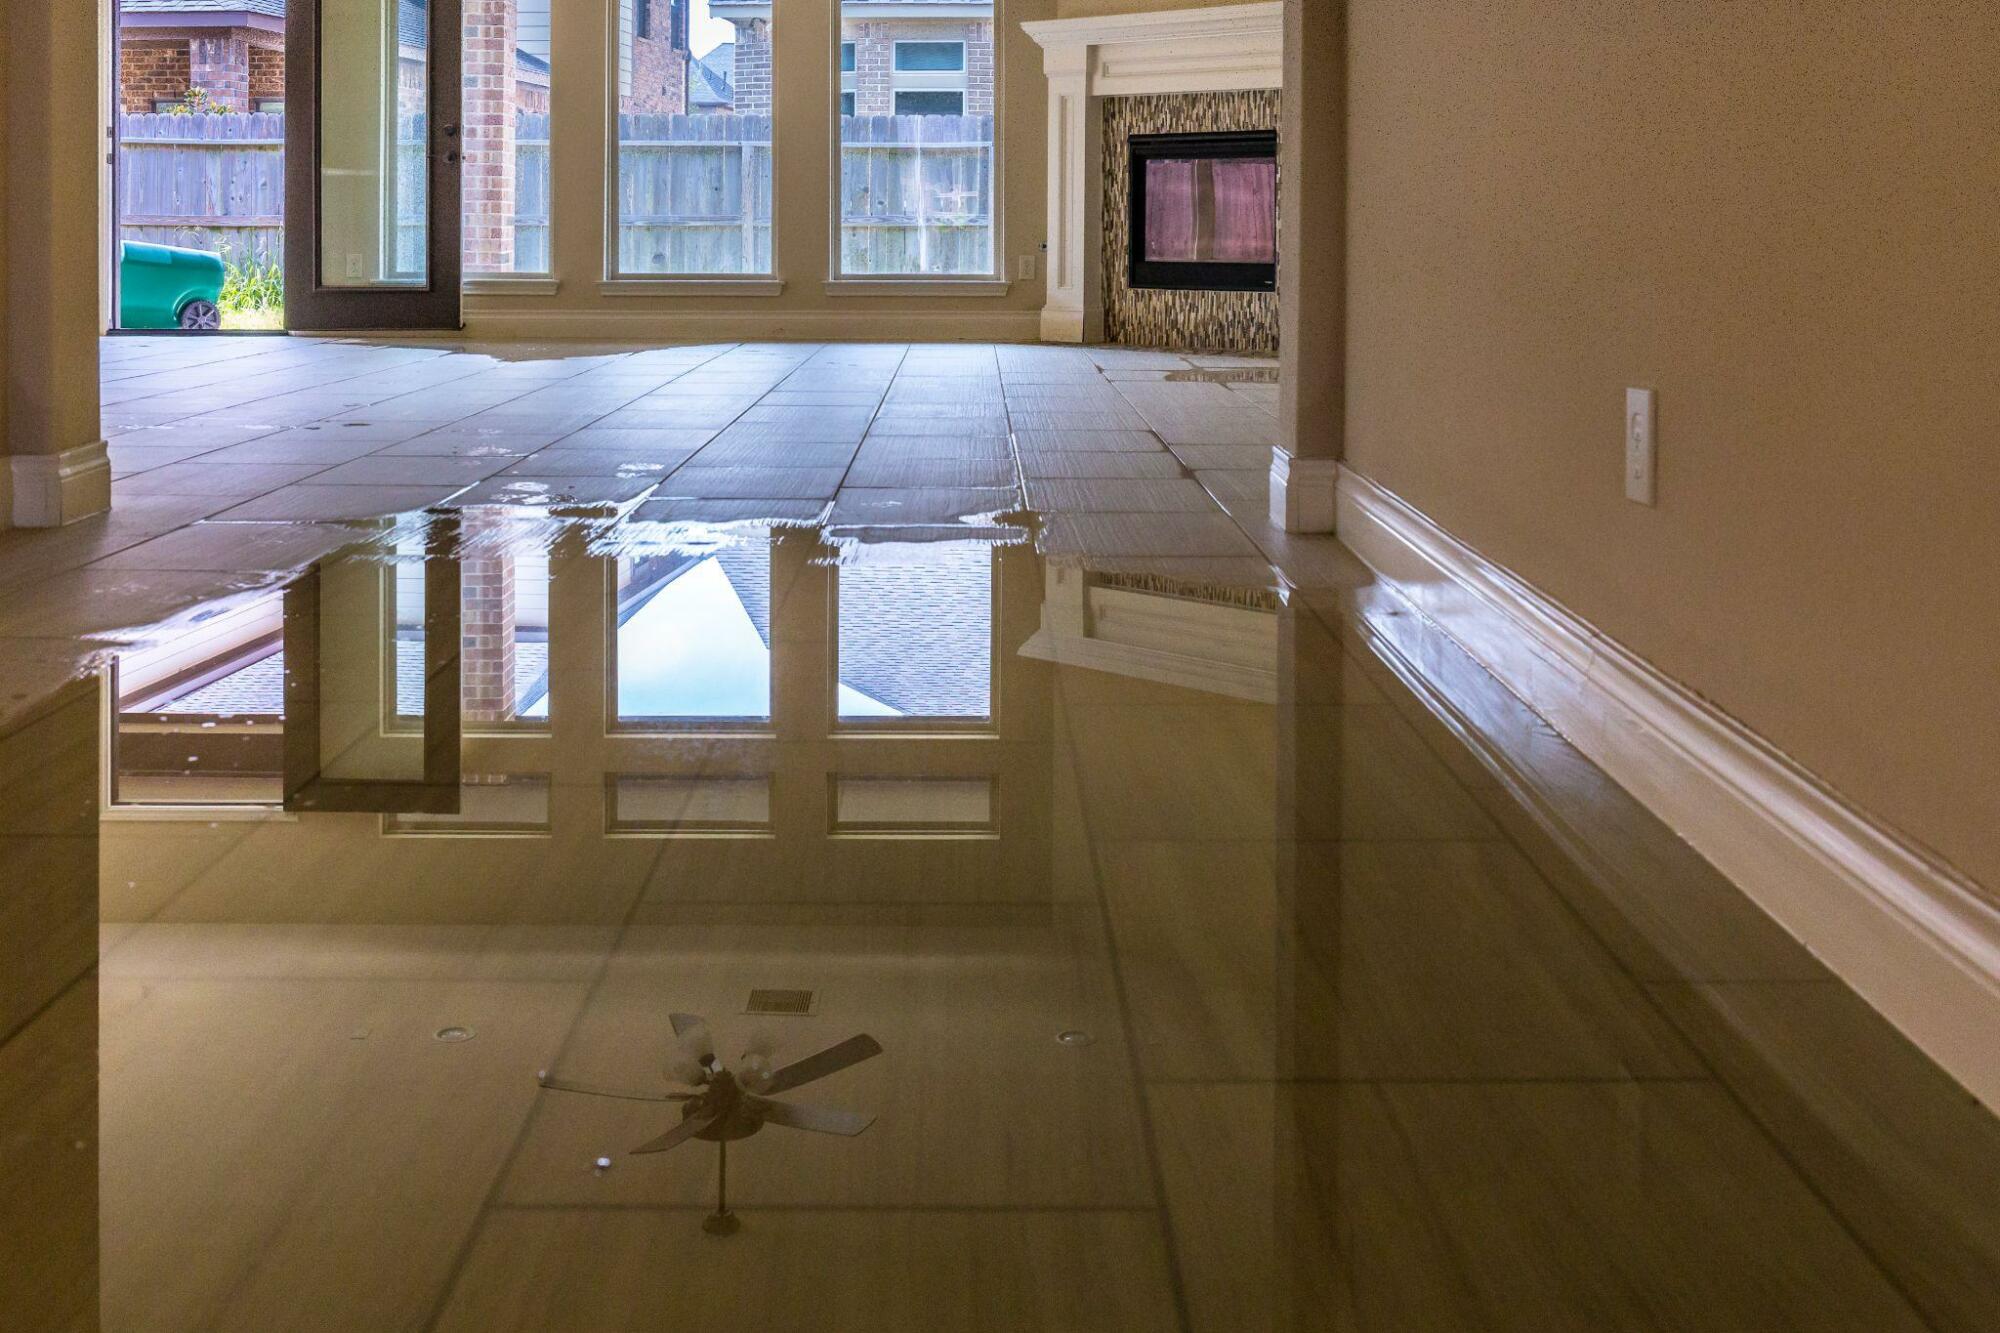 Flooded interior room with reflective water on floor.